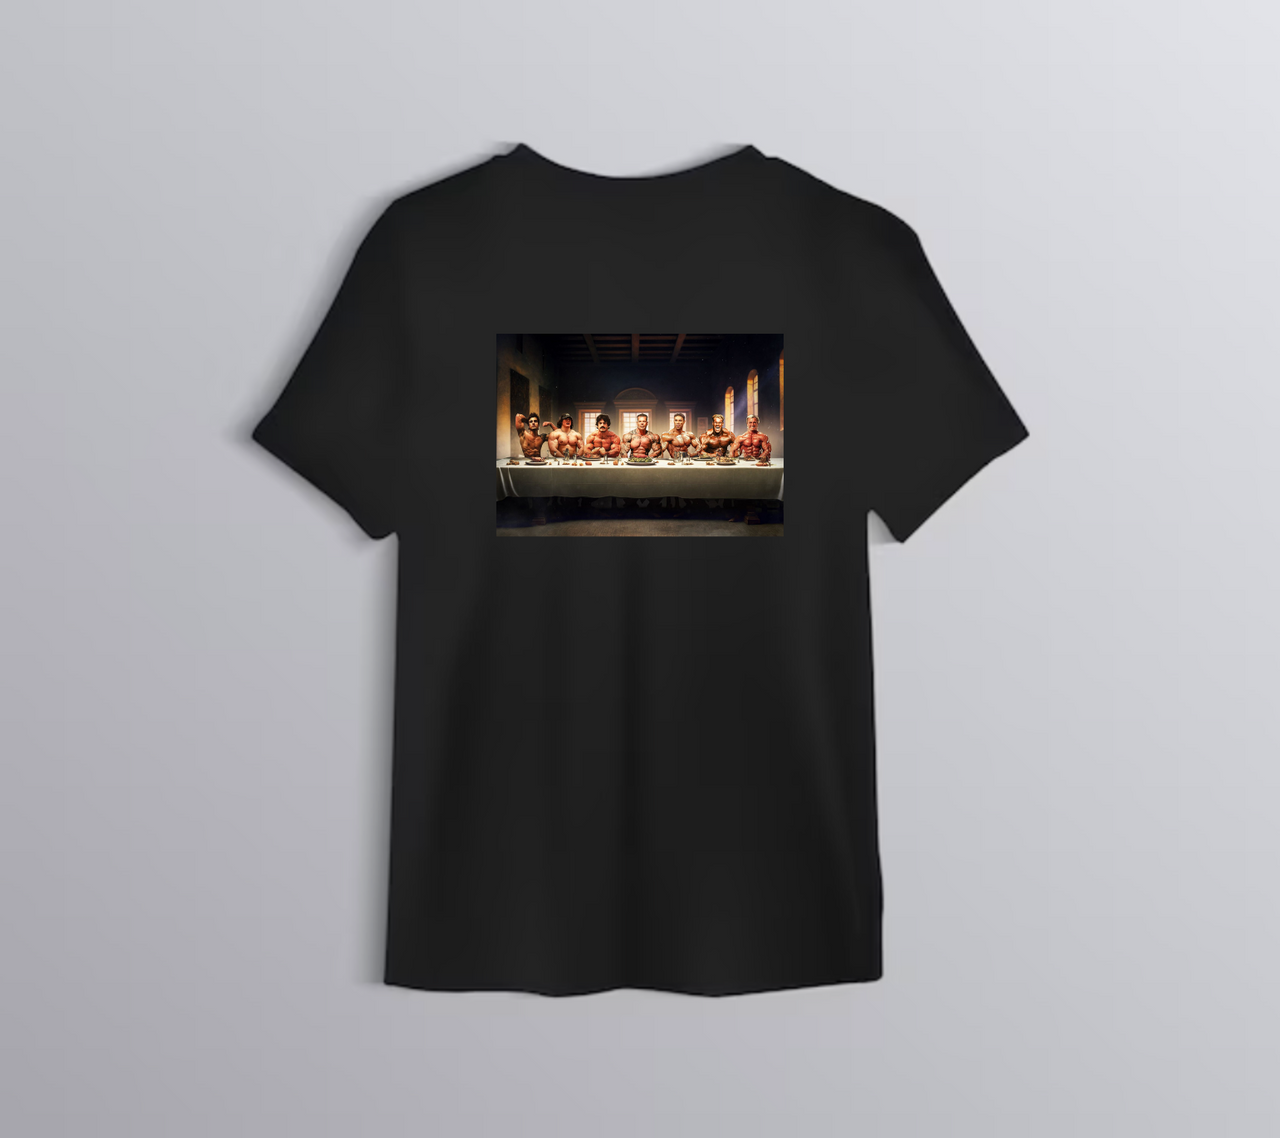 The Most Real Last Supper T-shirt